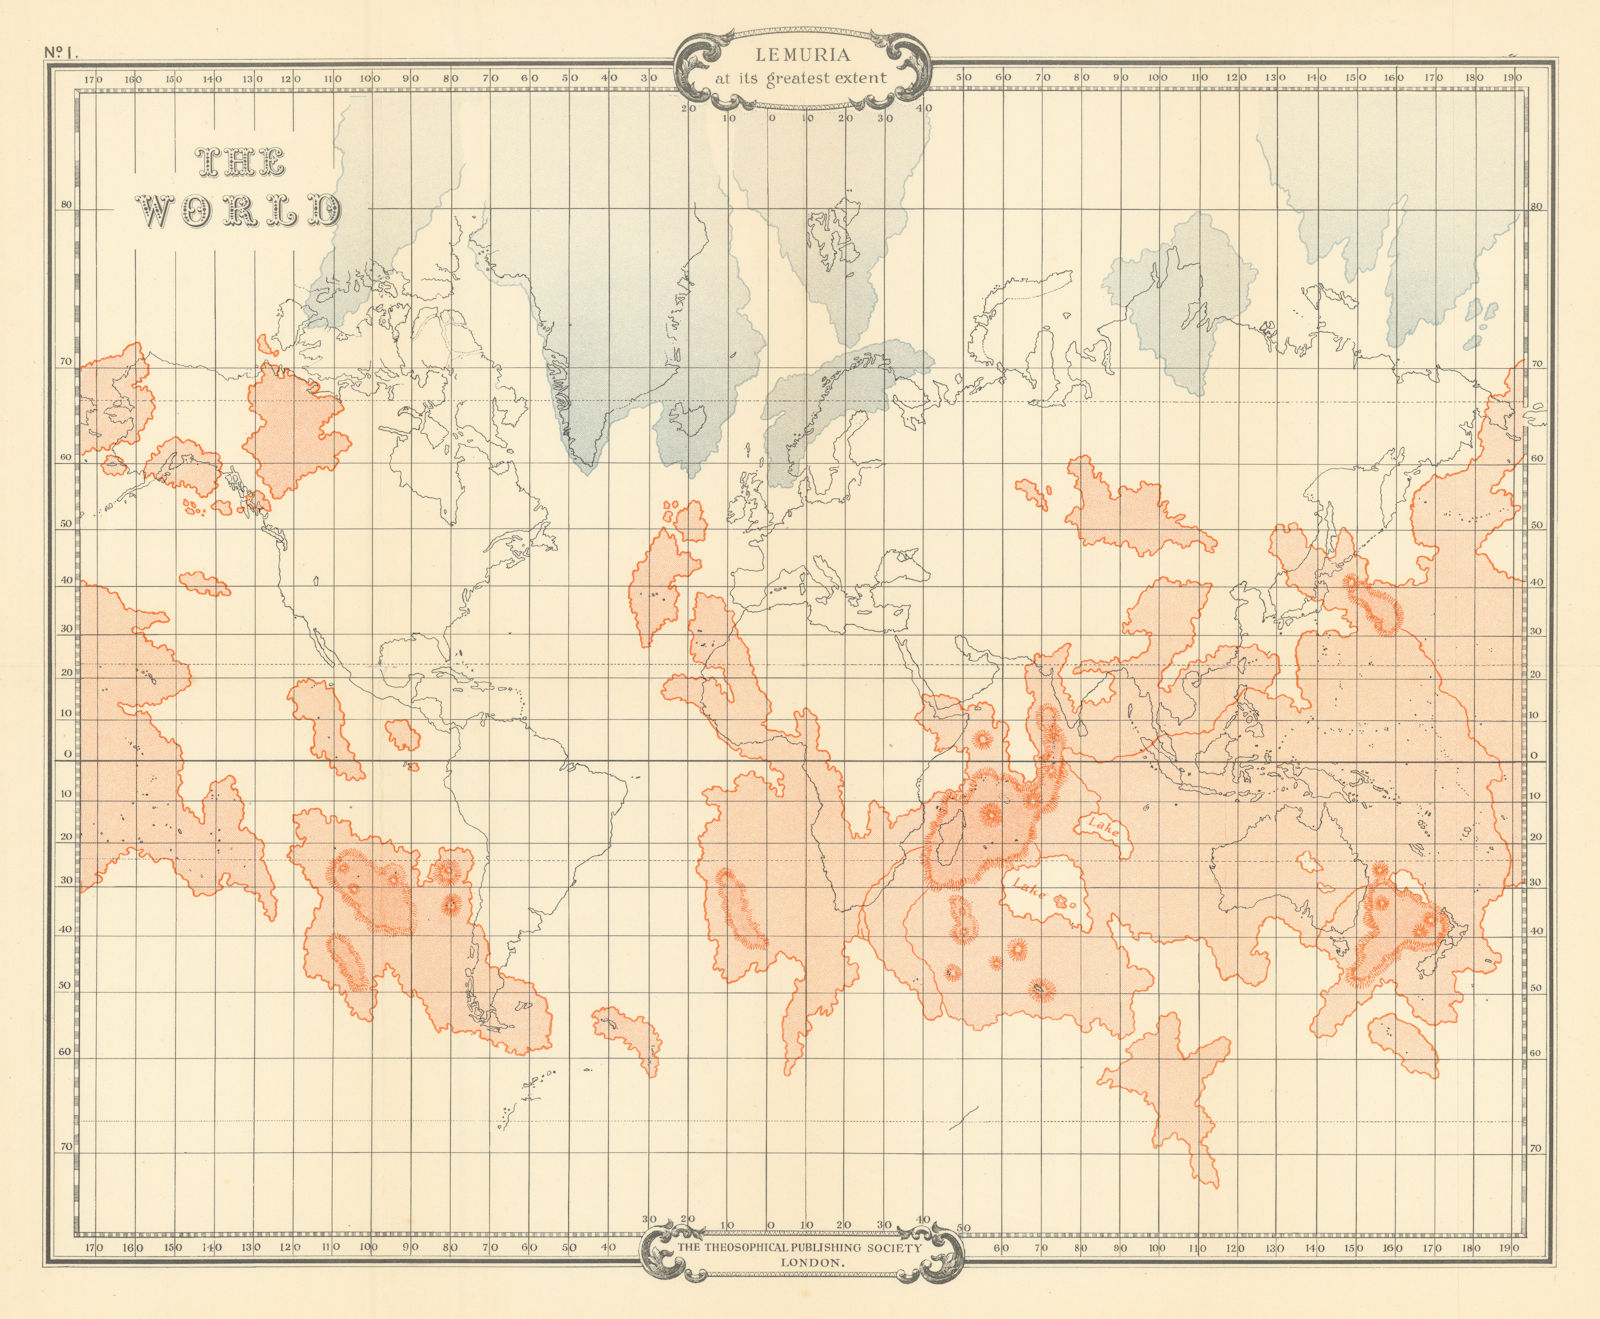 The World showing Lemuria at its greatest extent. SCOTT-ELLIOT 1925 old map